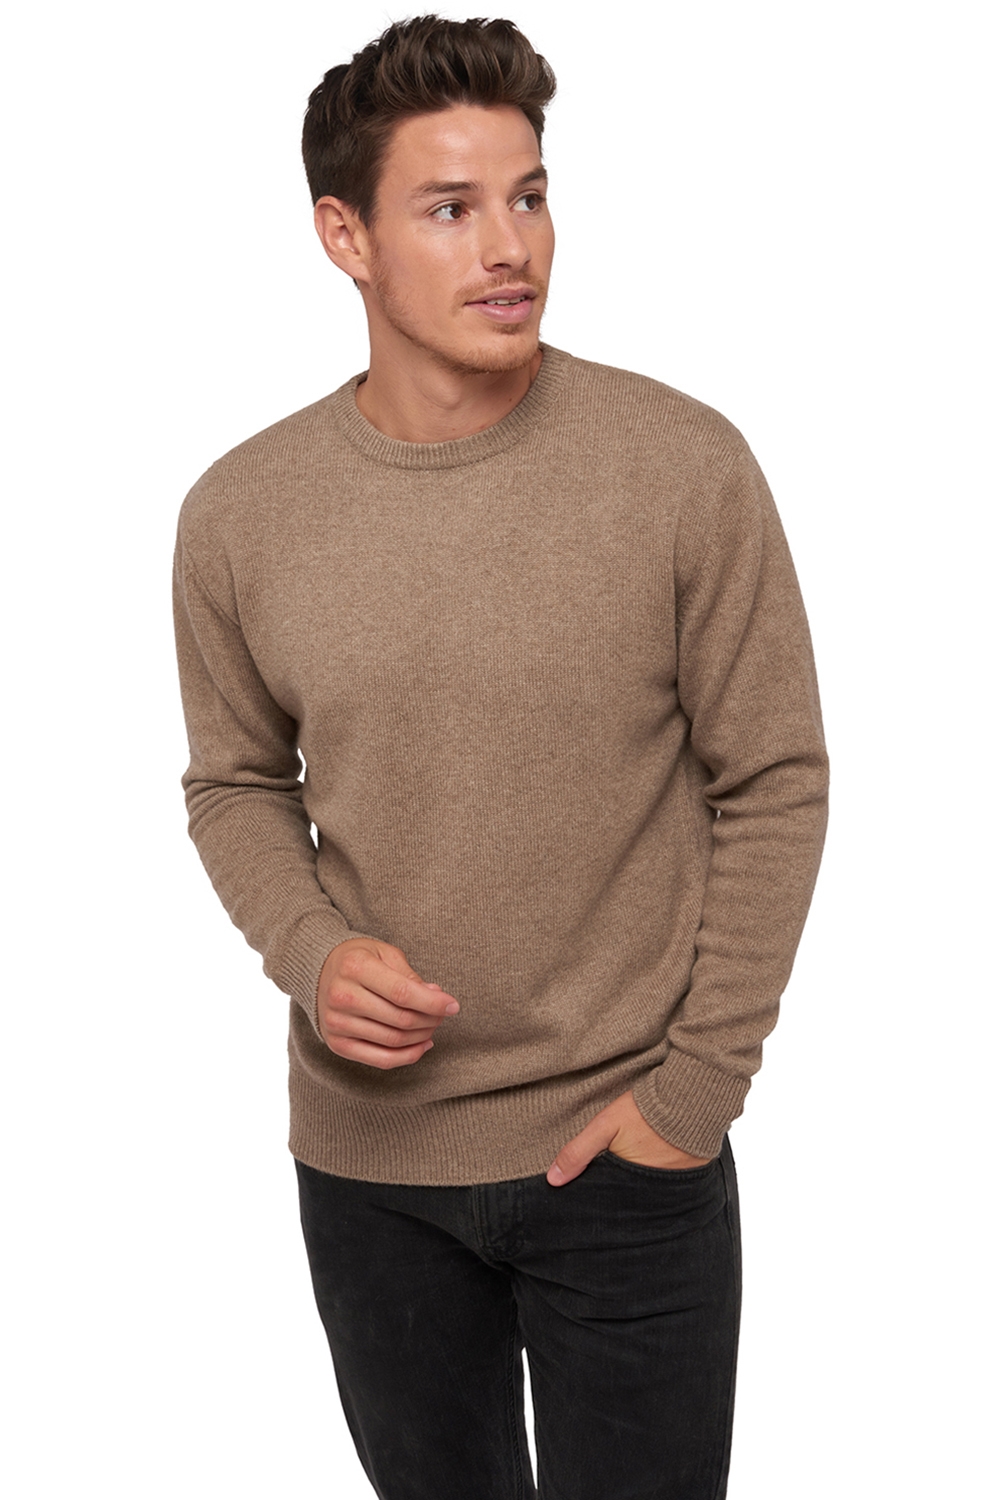 Cachemire Naturel pull homme epais natural ness 4f natural brown 3xl